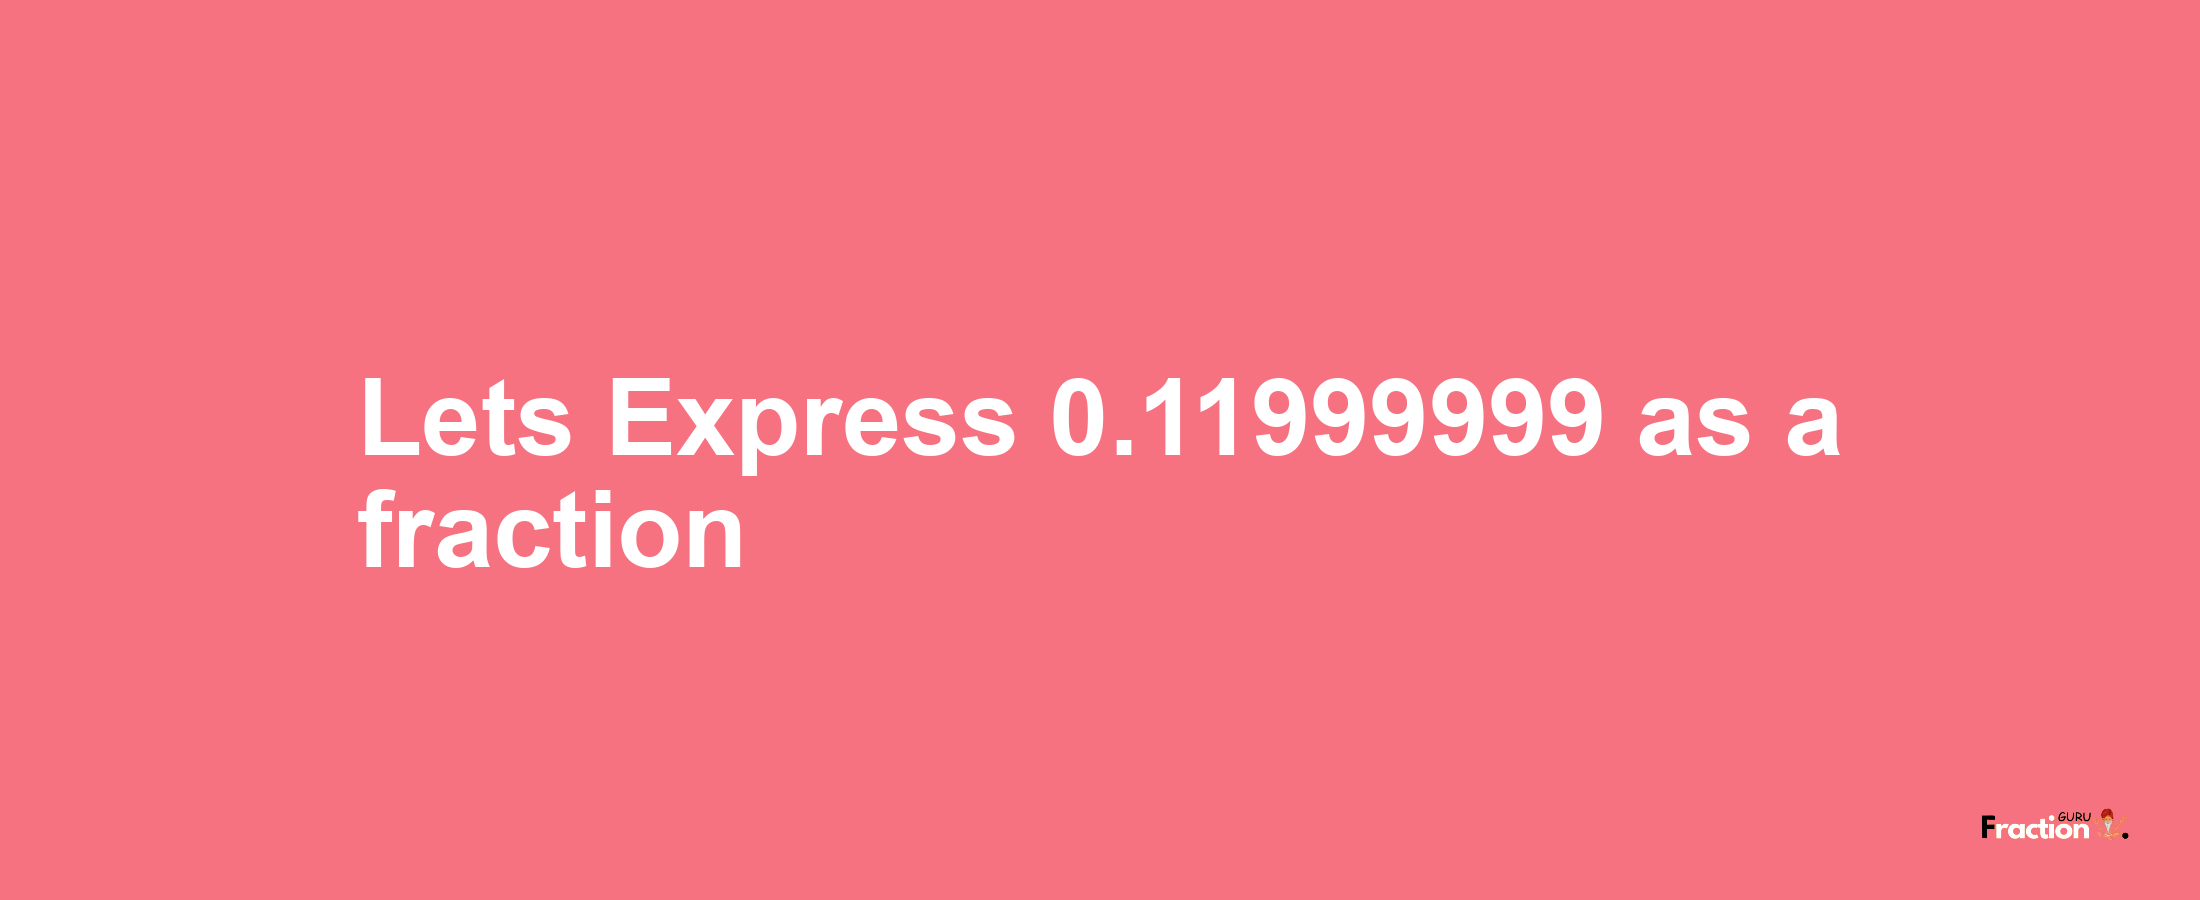 Lets Express 0.11999999 as afraction